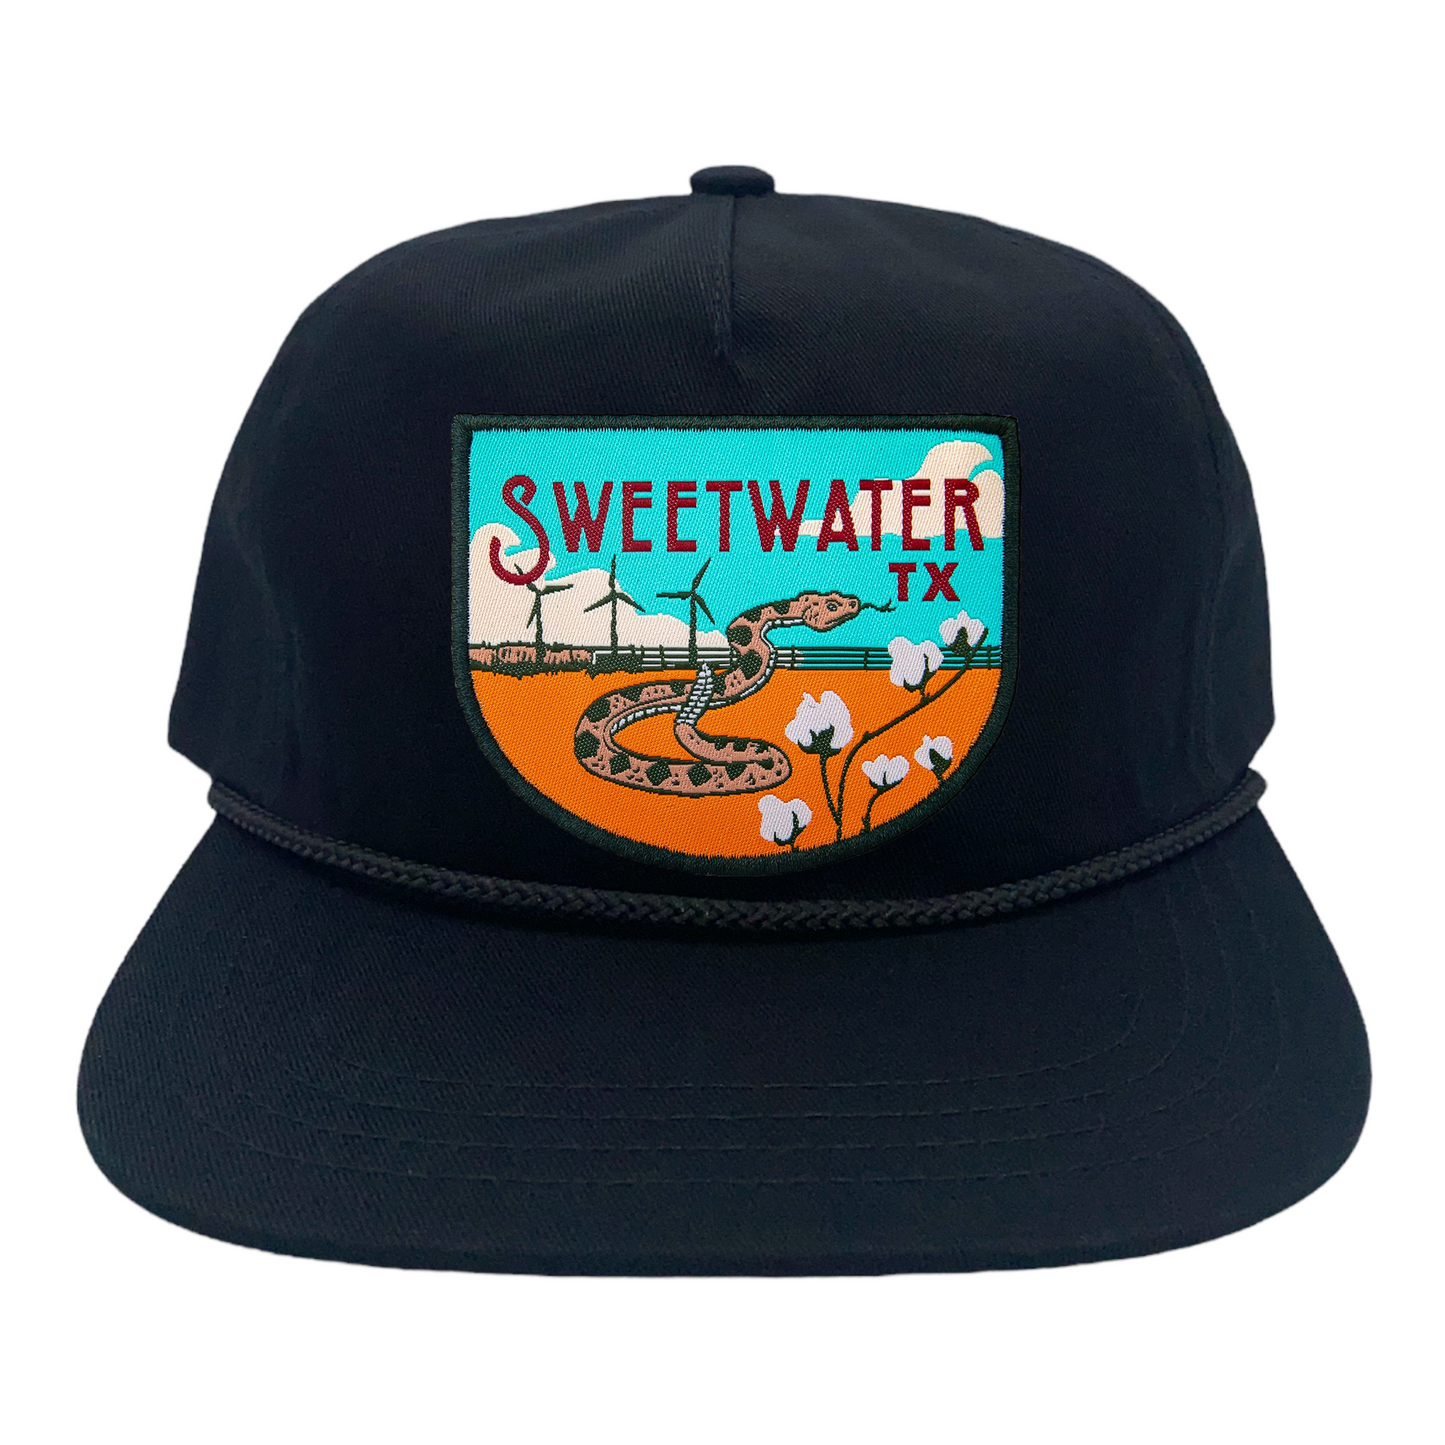 Sweetwater, TX Snapback